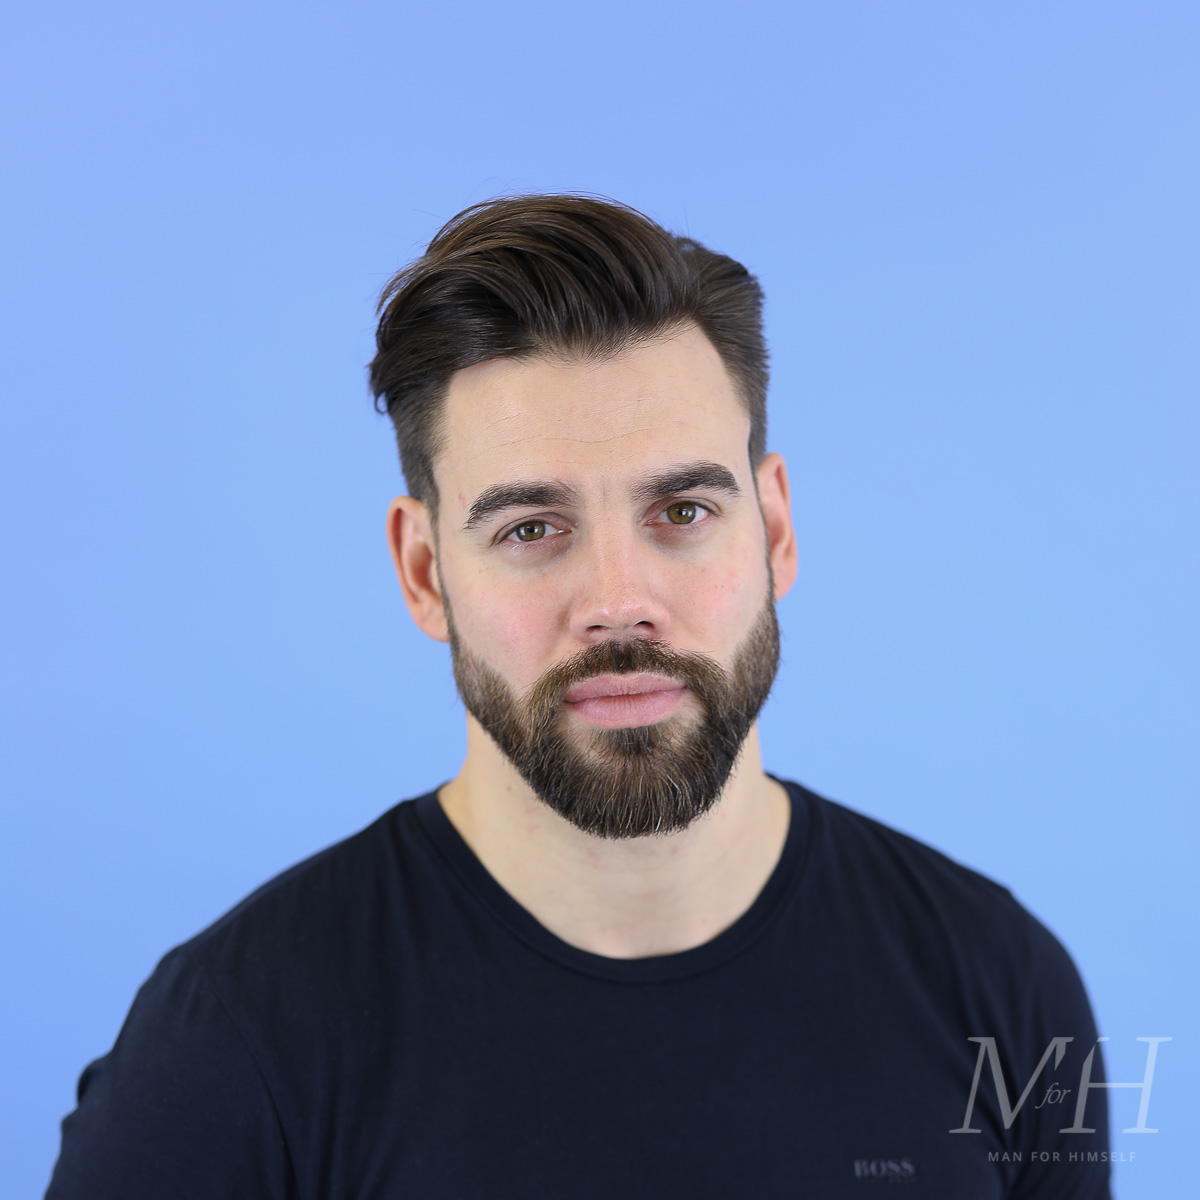 Download Messy Straight Men Hair Style Wallpaper | Wallpapers.com